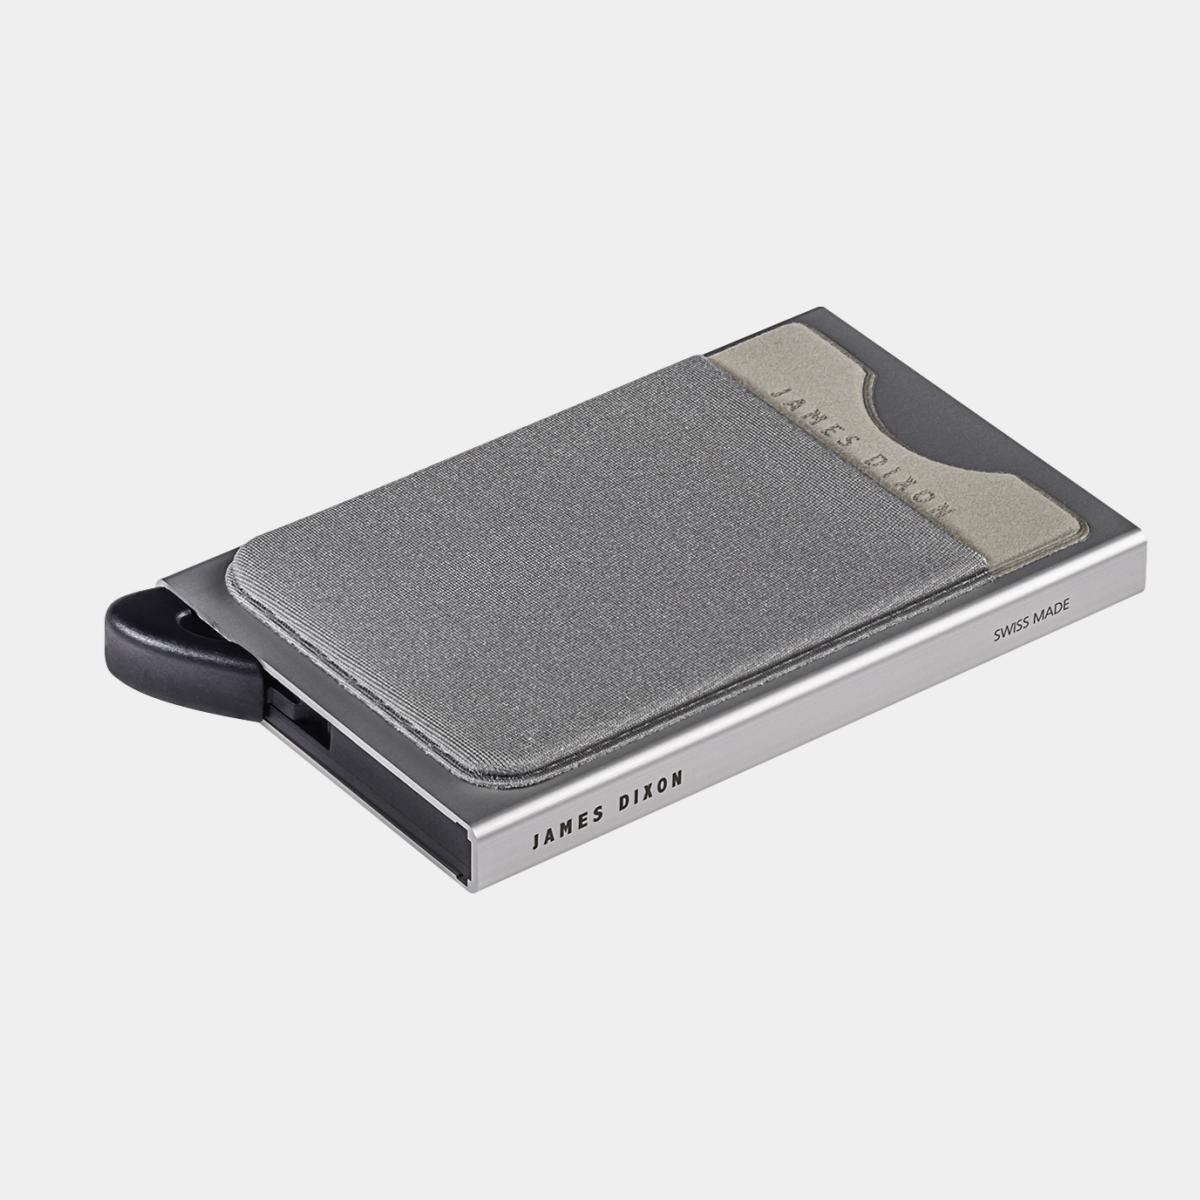 jd0070 james dixon extra cards grey pocket on solo card holder inclined